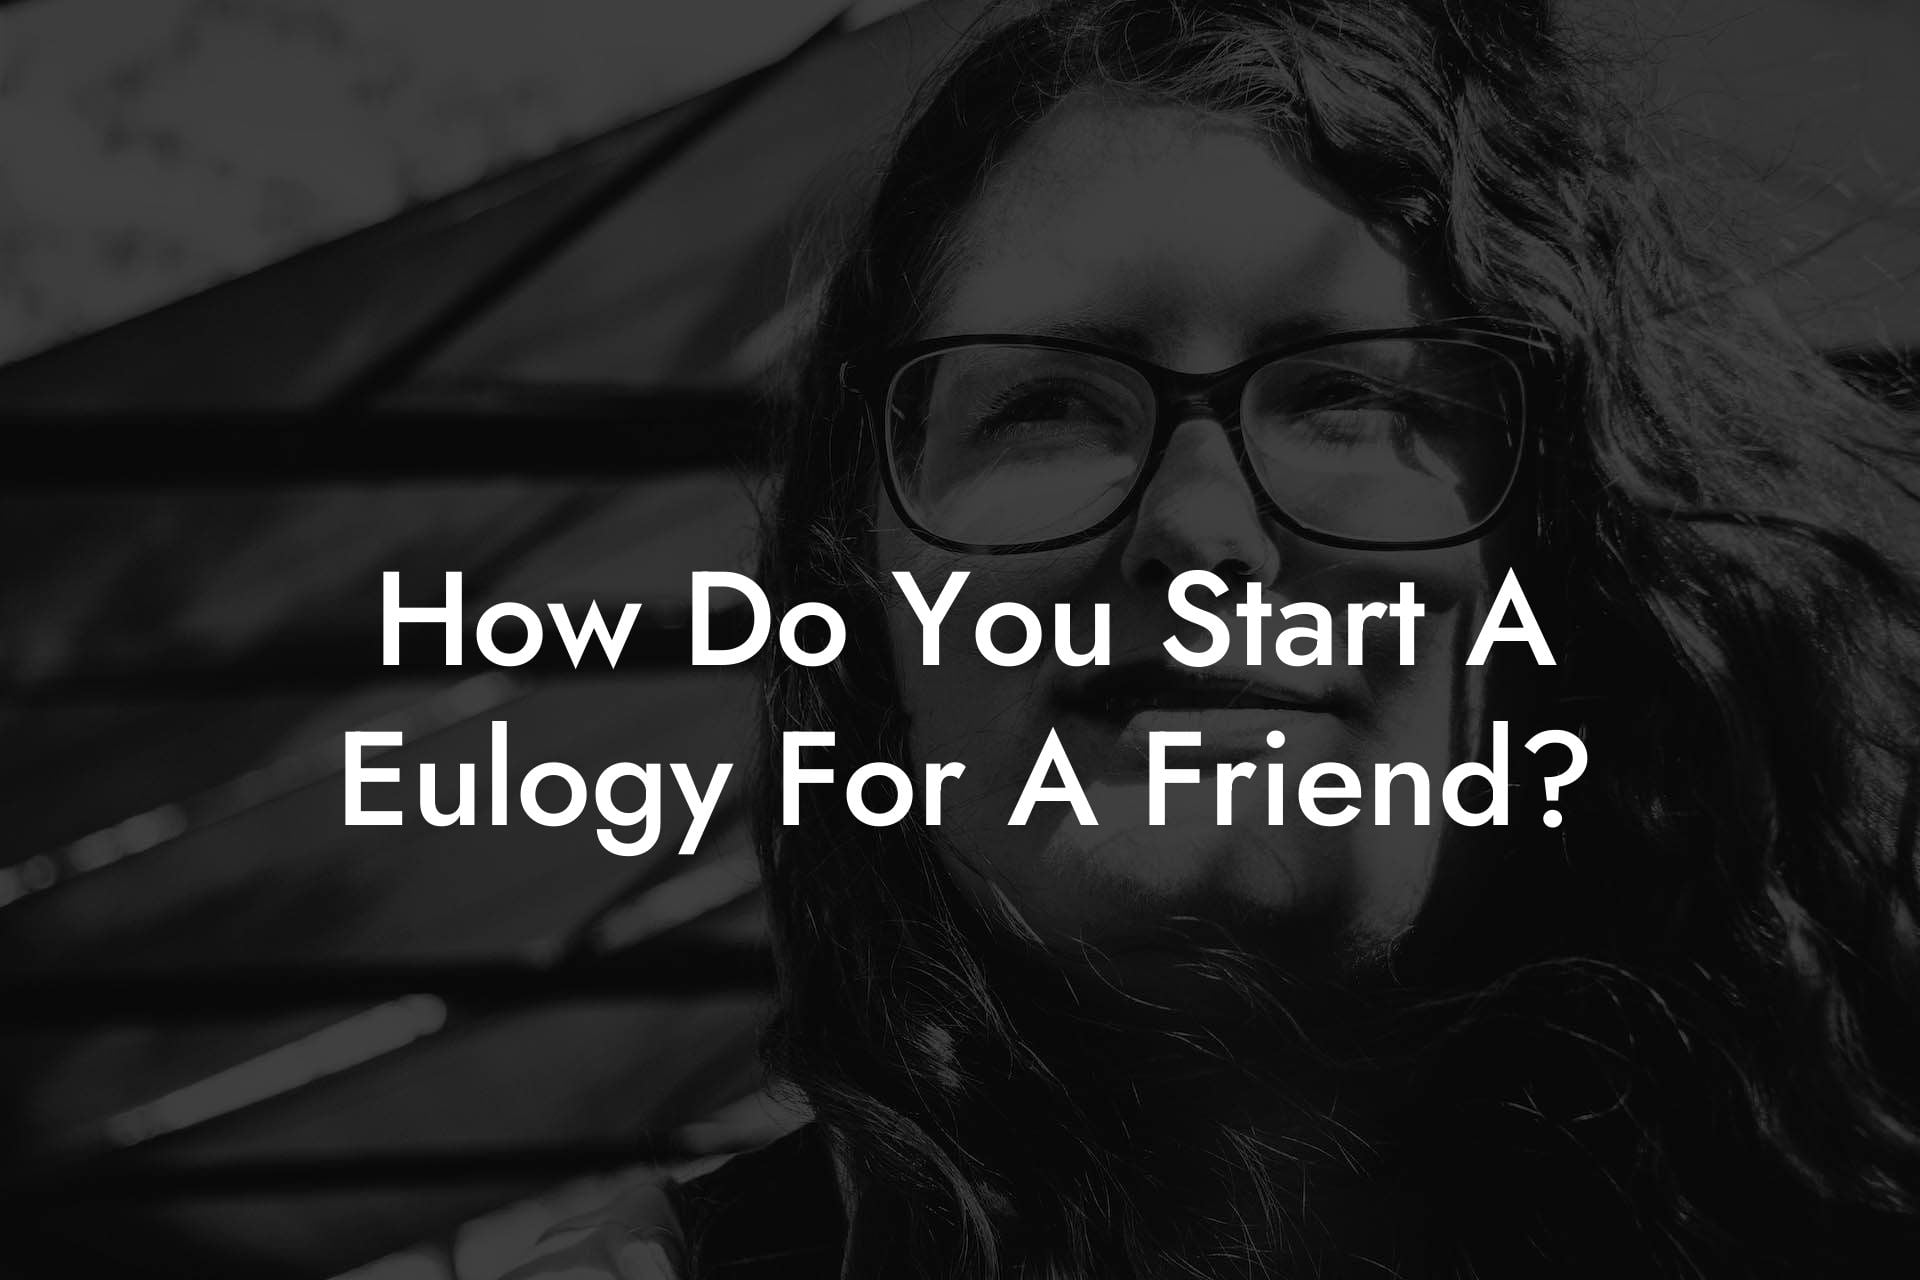 How Do You Start A Eulogy For A Friend?